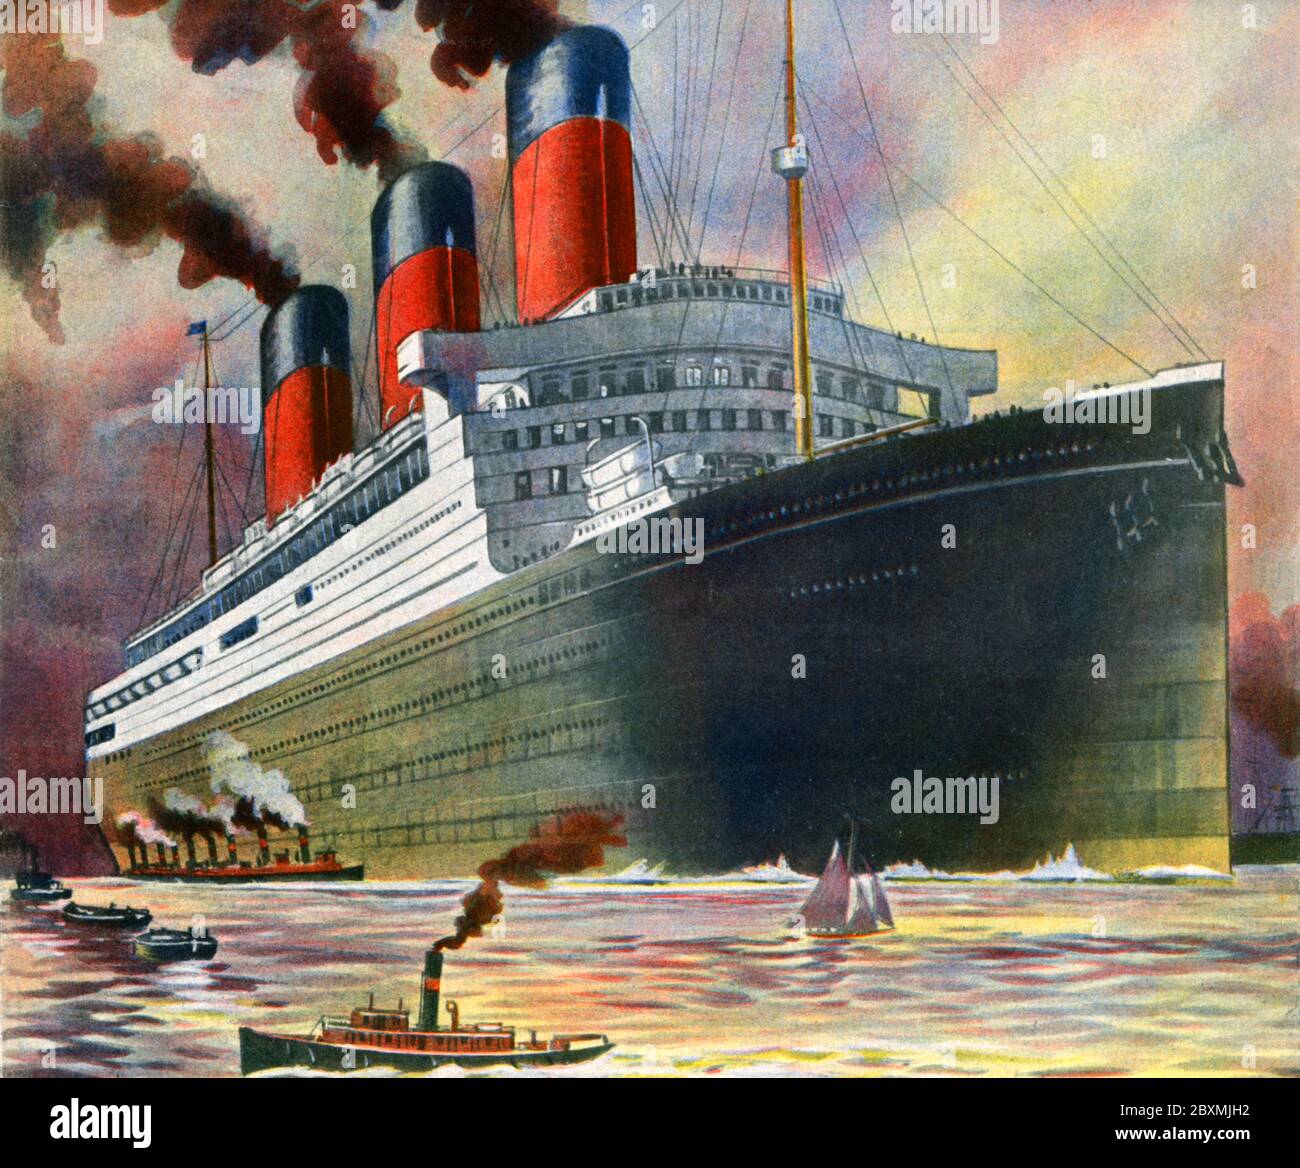 RMS Majestic. A passanger ship built 1914 and was originally named SS Bismarck. It was 291 meter long and took 3500 passangers. White Star Line had the ship cross the atlantic in five days, 18 hours, 8 minutes at a cruising speed of average 20,1 knots. Illustration from 1923 Stock Photo